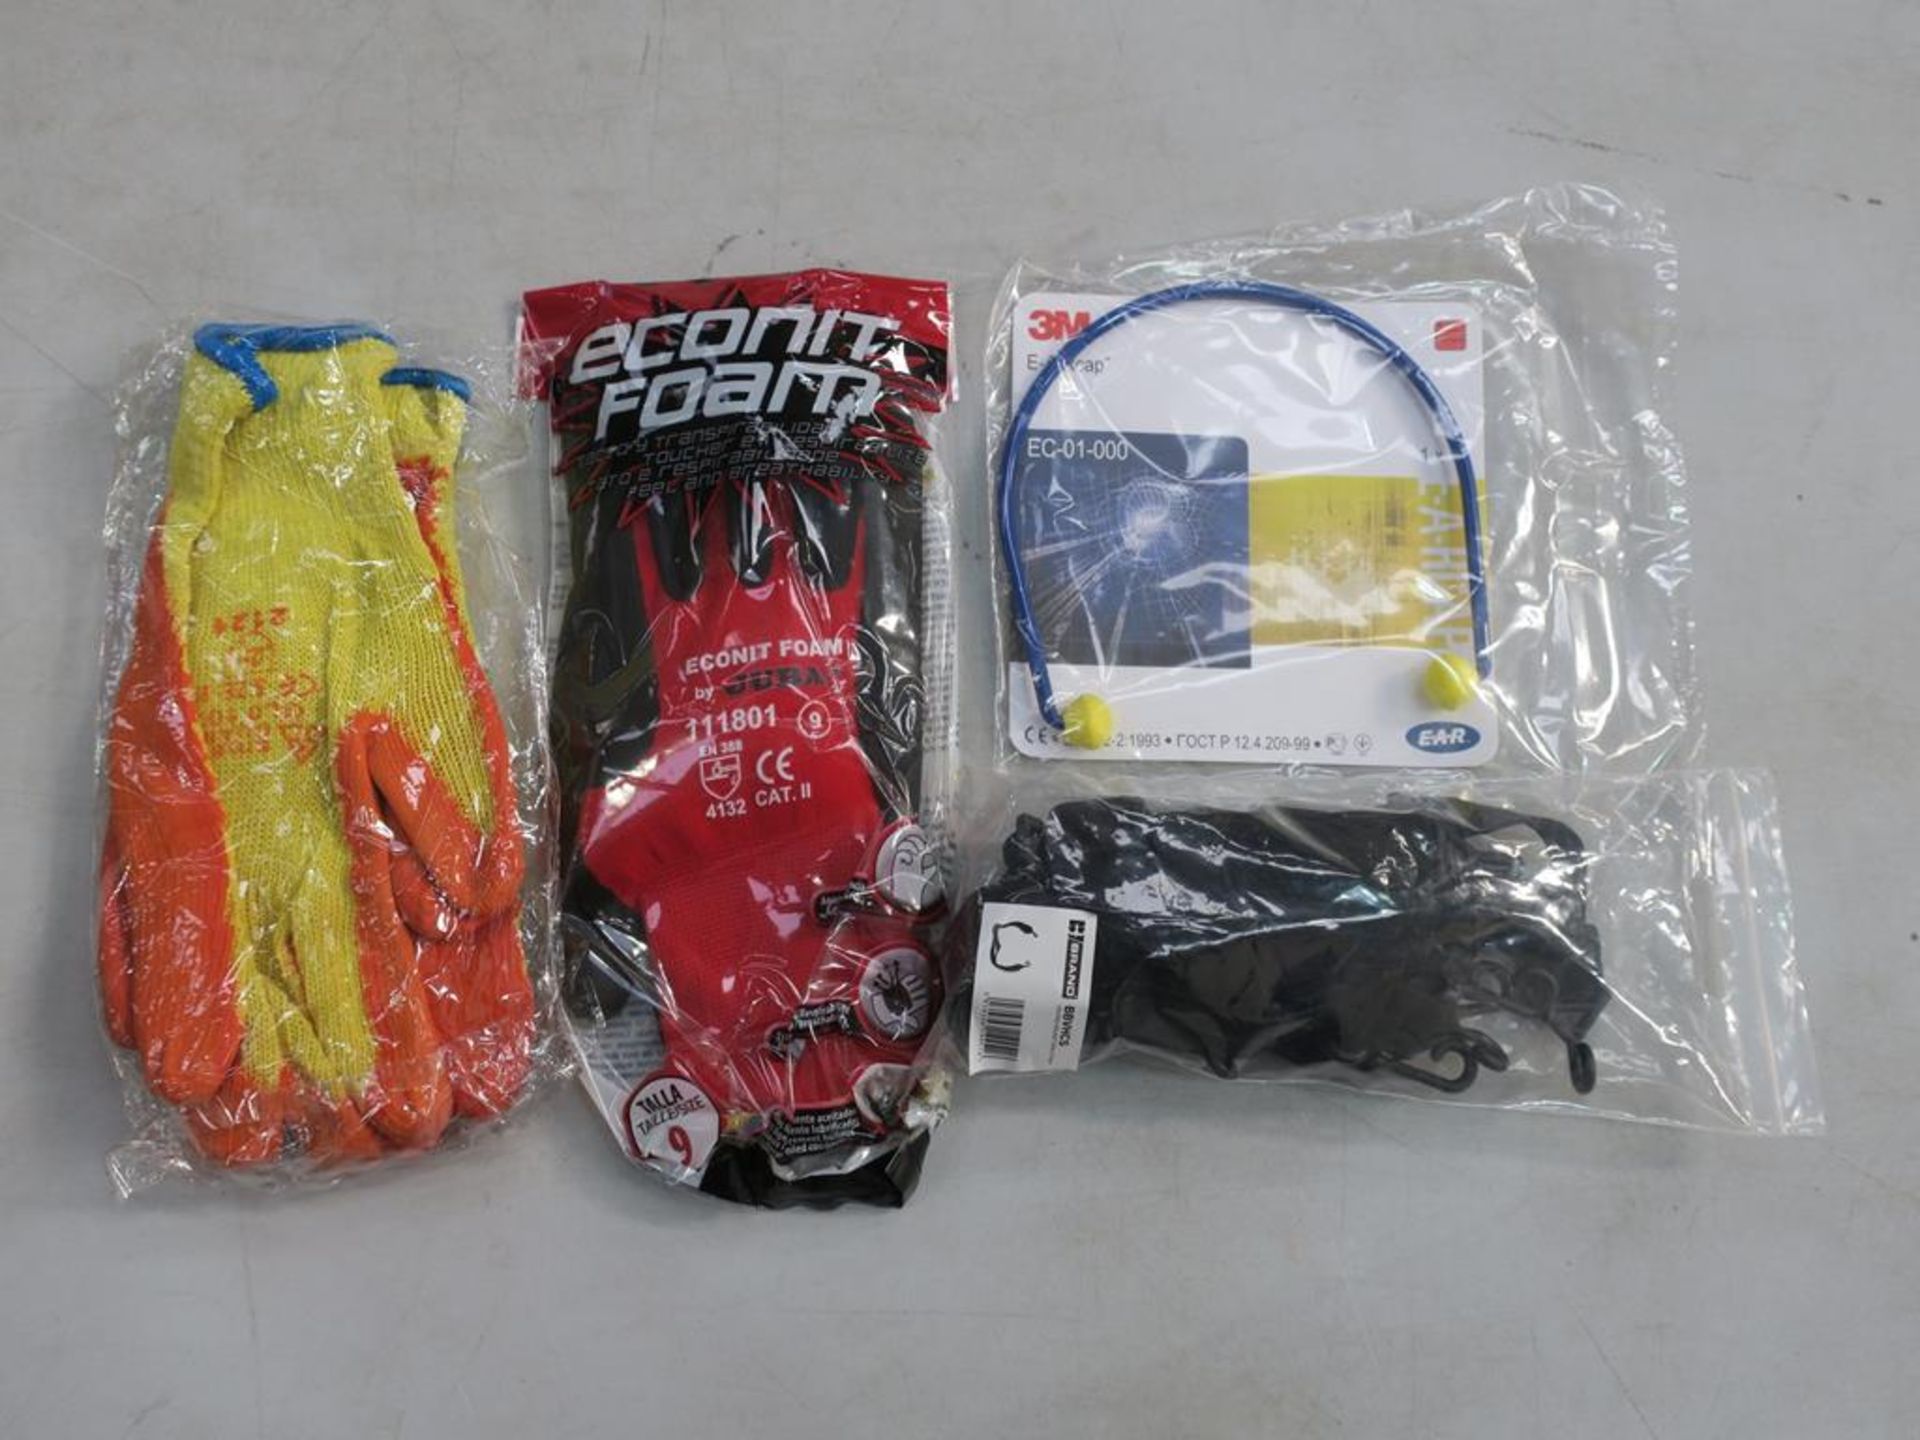 * A mixed lot of Safety Equipment: a box of 3m E-A-R Cap Ear Defenders, two packs of 'Vented